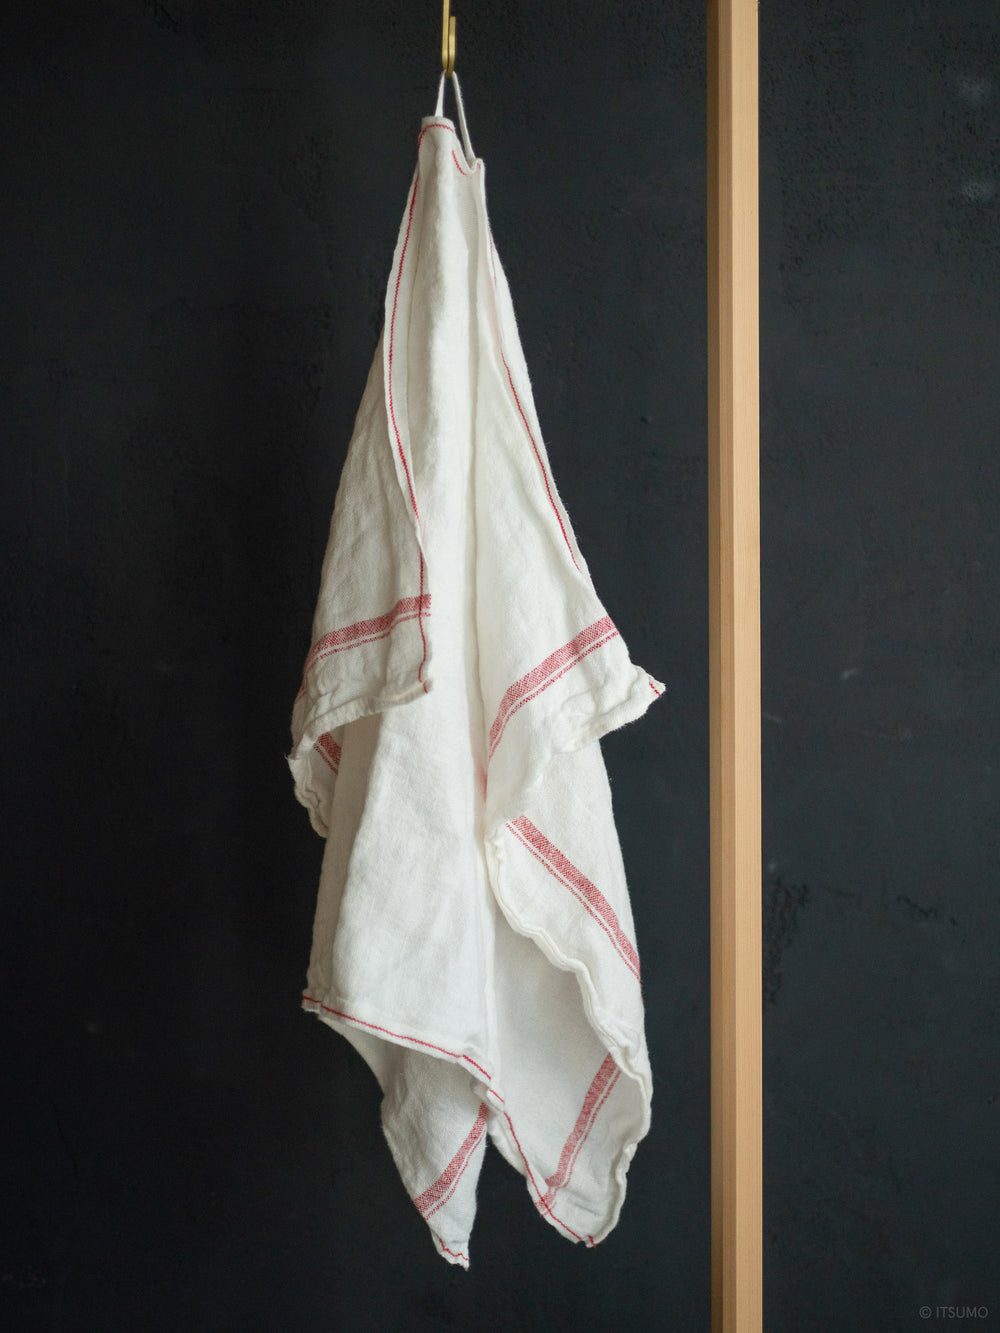 Azmaya white azabu linen kitchen cloth with a red stripe along the edge, hanging from a hook